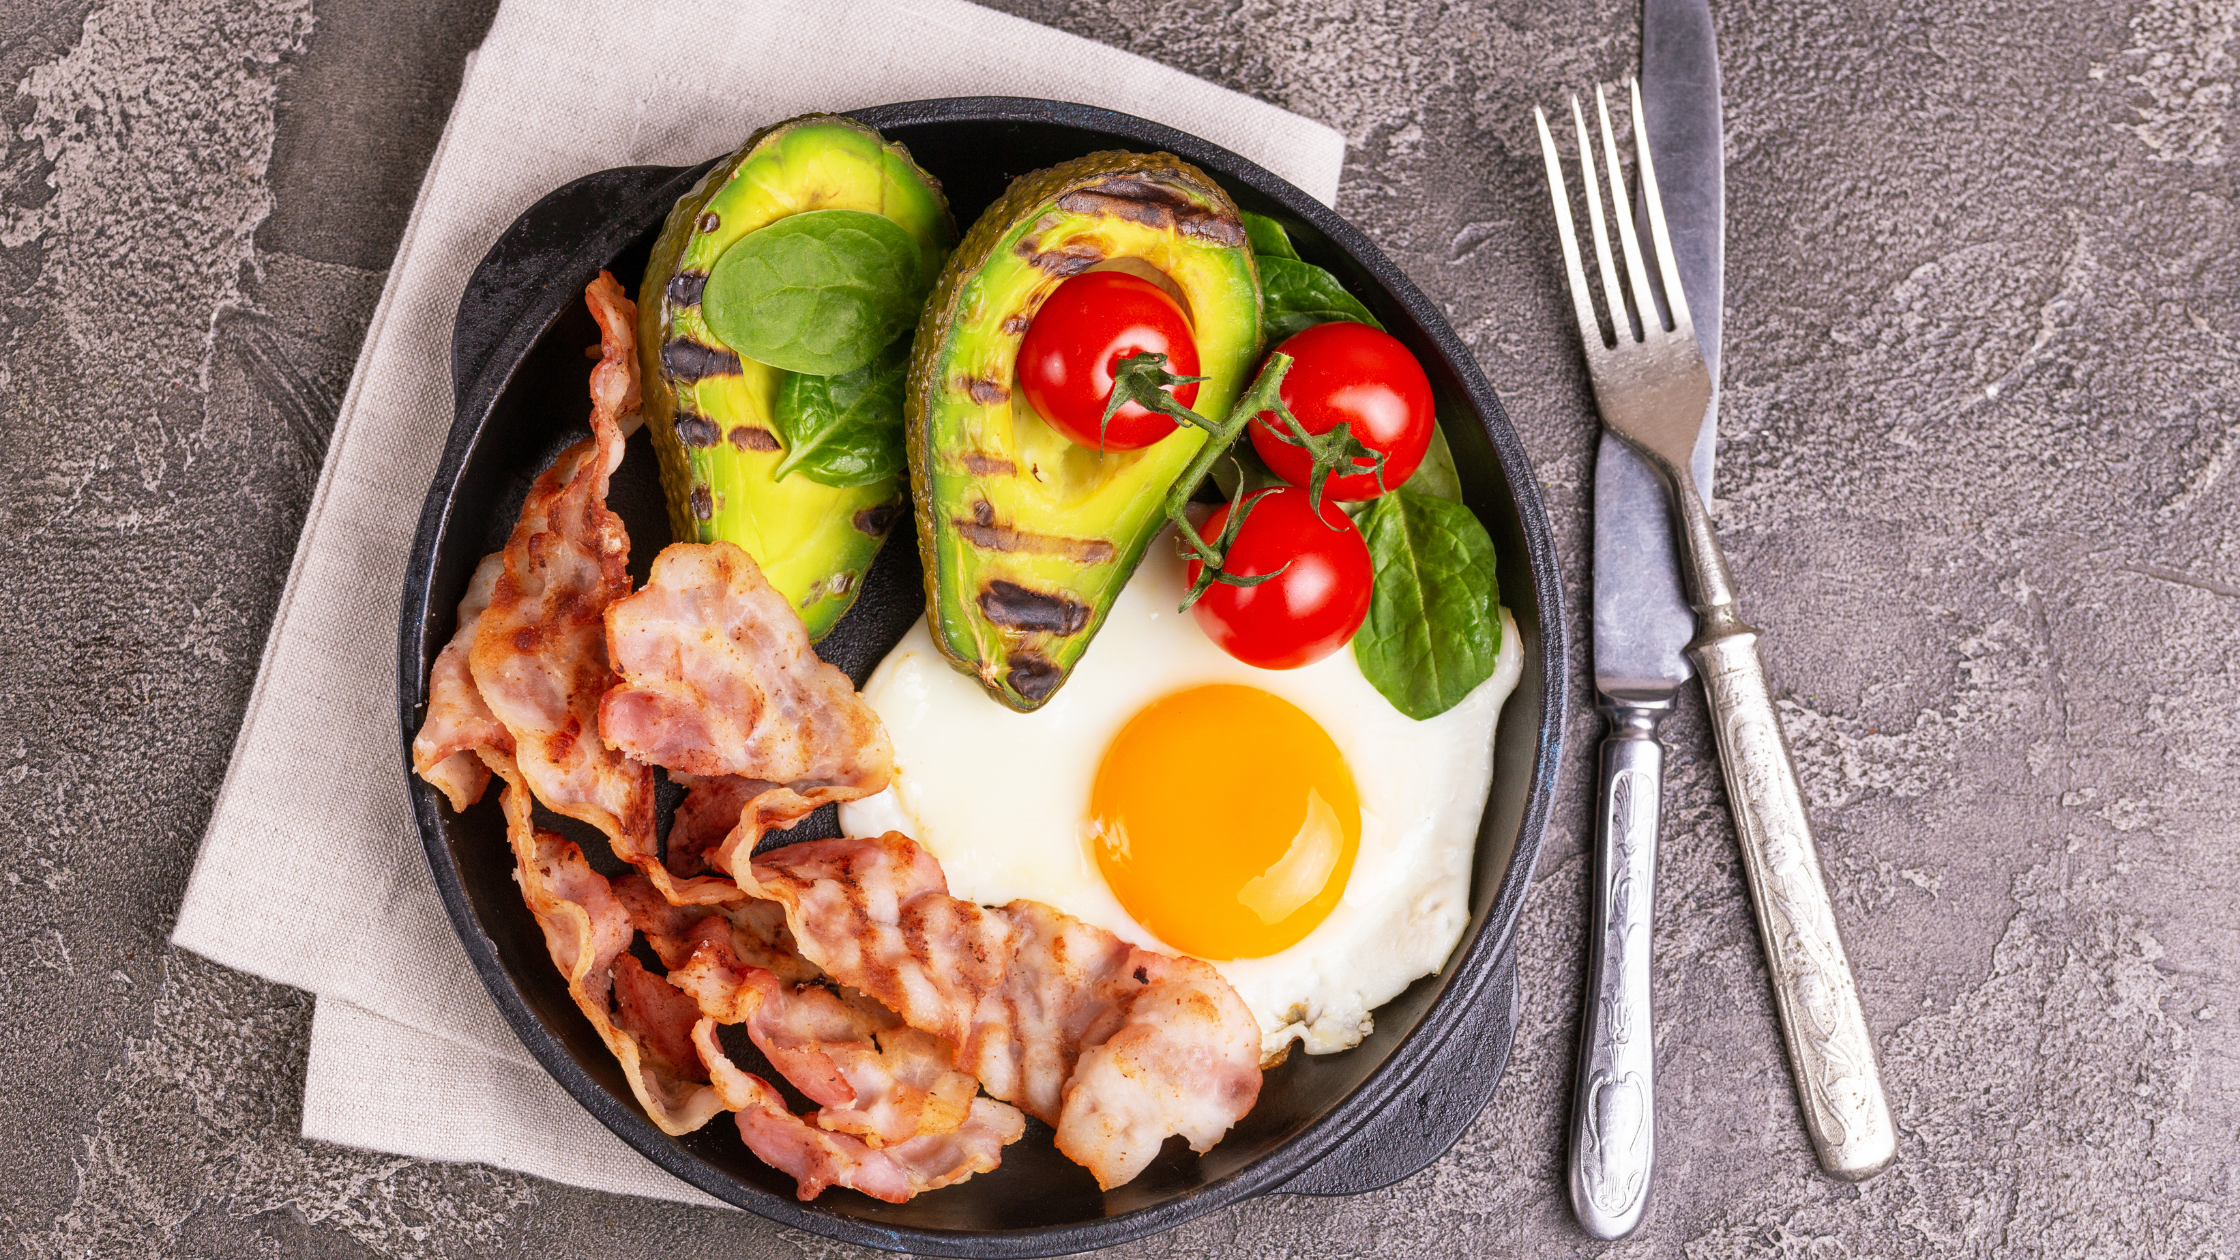 Picture of a high-fat meal containing avocado, bacon, an egg, and tomatoes